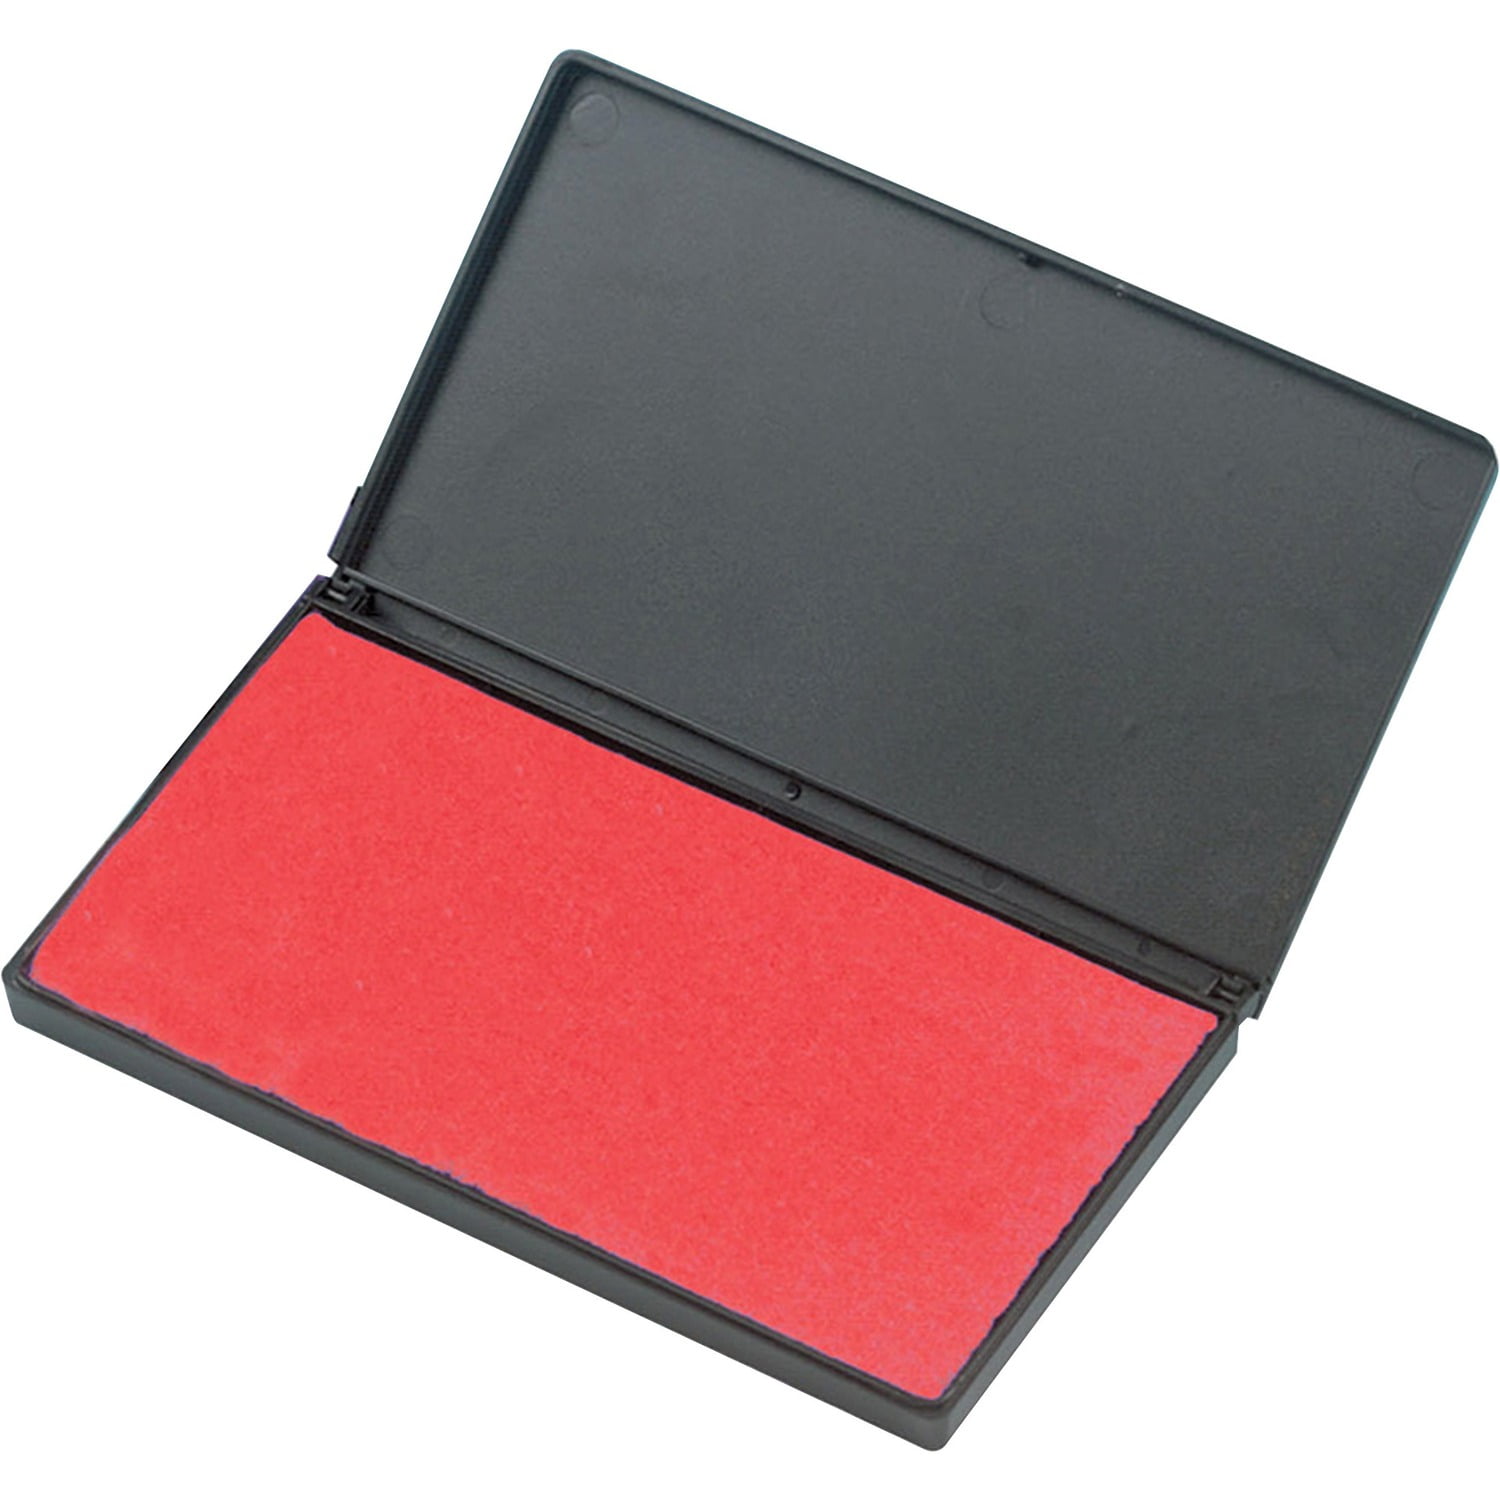 No.0 Stamp Pad, 2.25 x 3.5, Red - Stamp Pads - Stamp Accessories